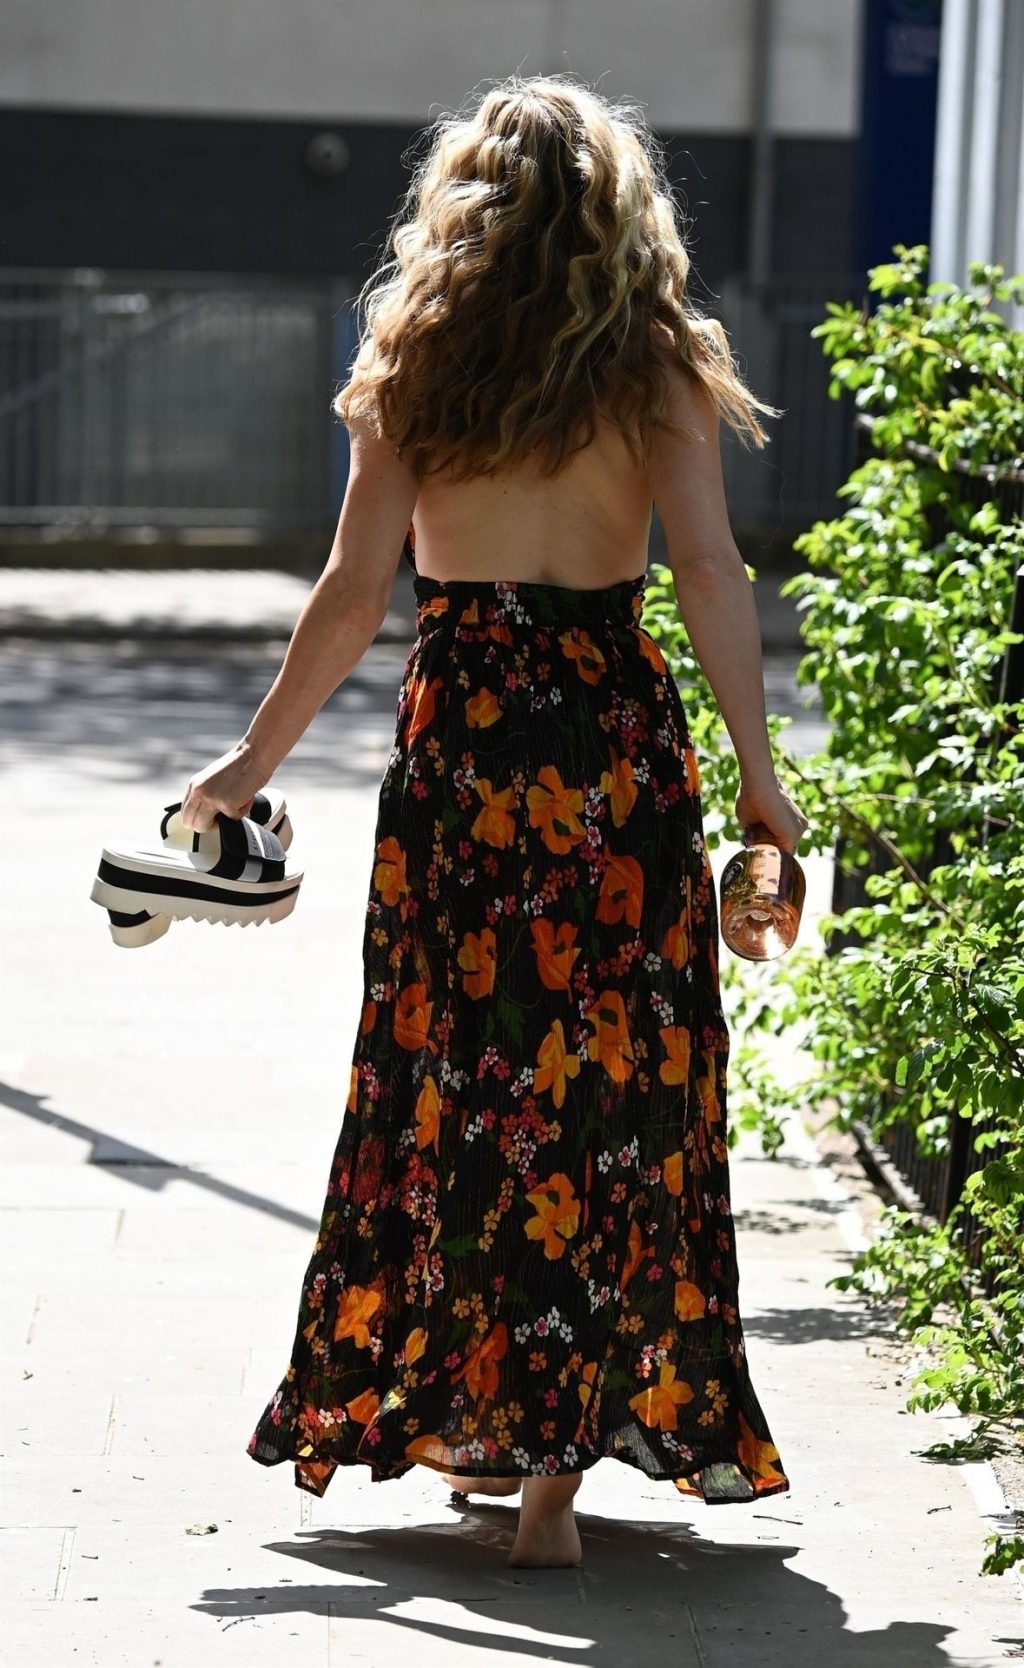 Caprice Steps Out in a Thigh High Split Floral Dress on Her Way to Meet Friends for Lunch (29 Photos)